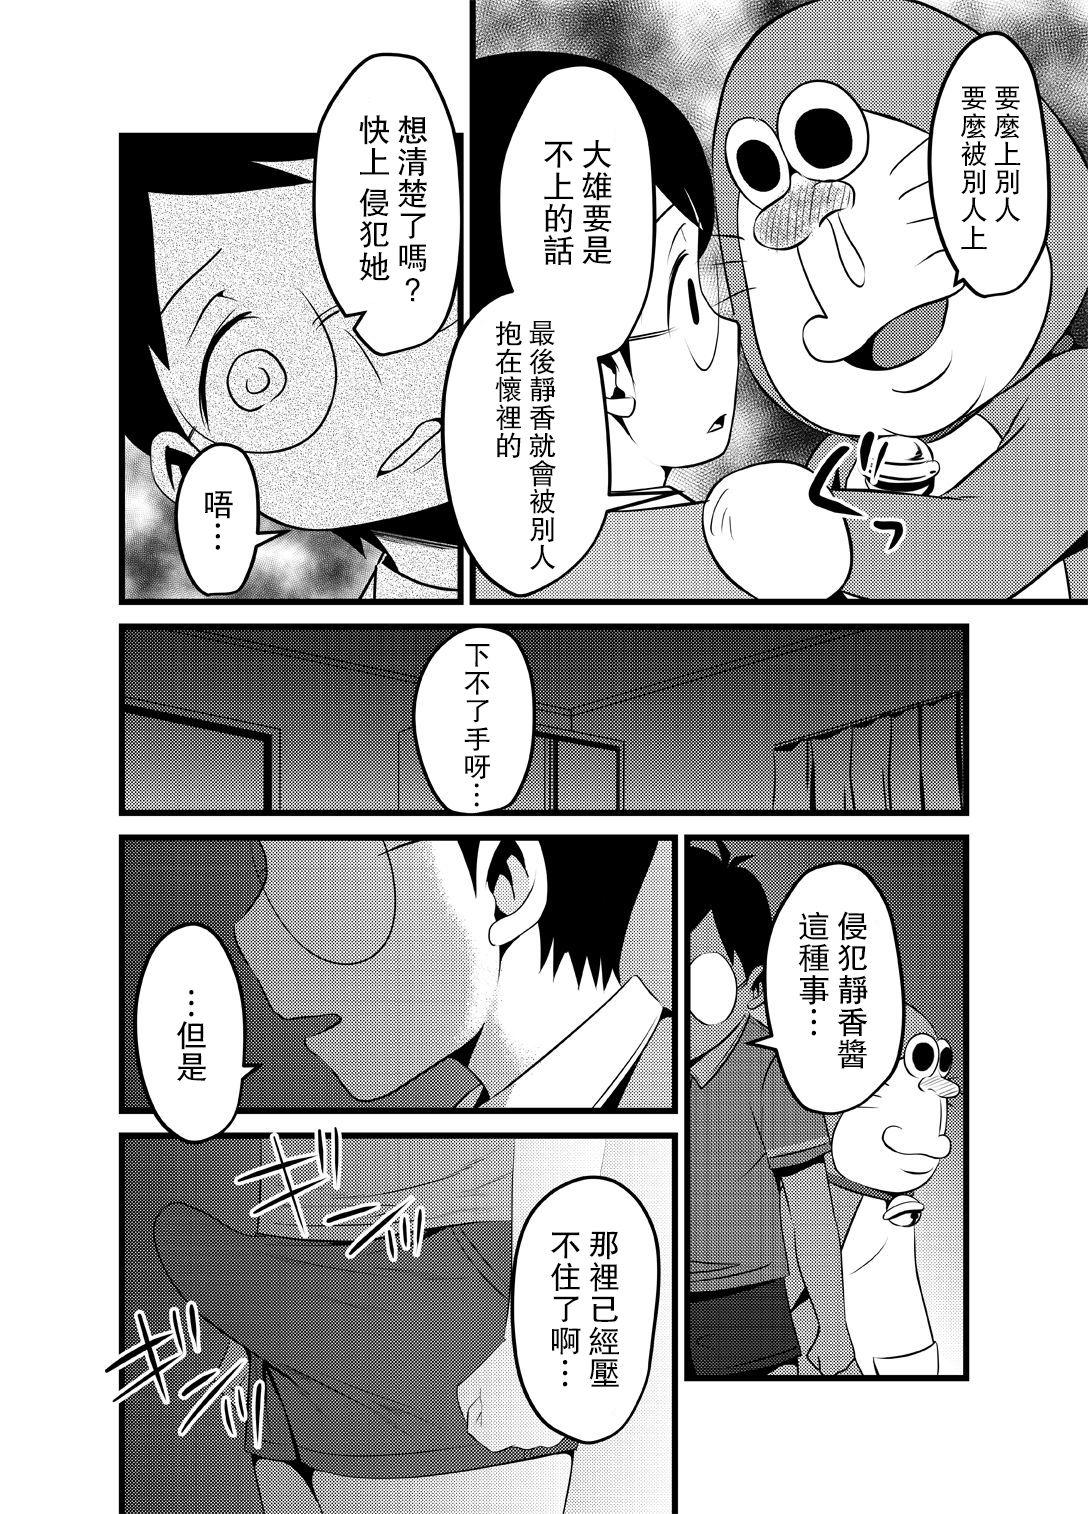 Amateurs [Babymaker (Beco)] Gesuemon STAND-MY-D (Doraemon) [Digital] [Chinese] [路过的骑士汉化组] - Doraemon Young - Page 5